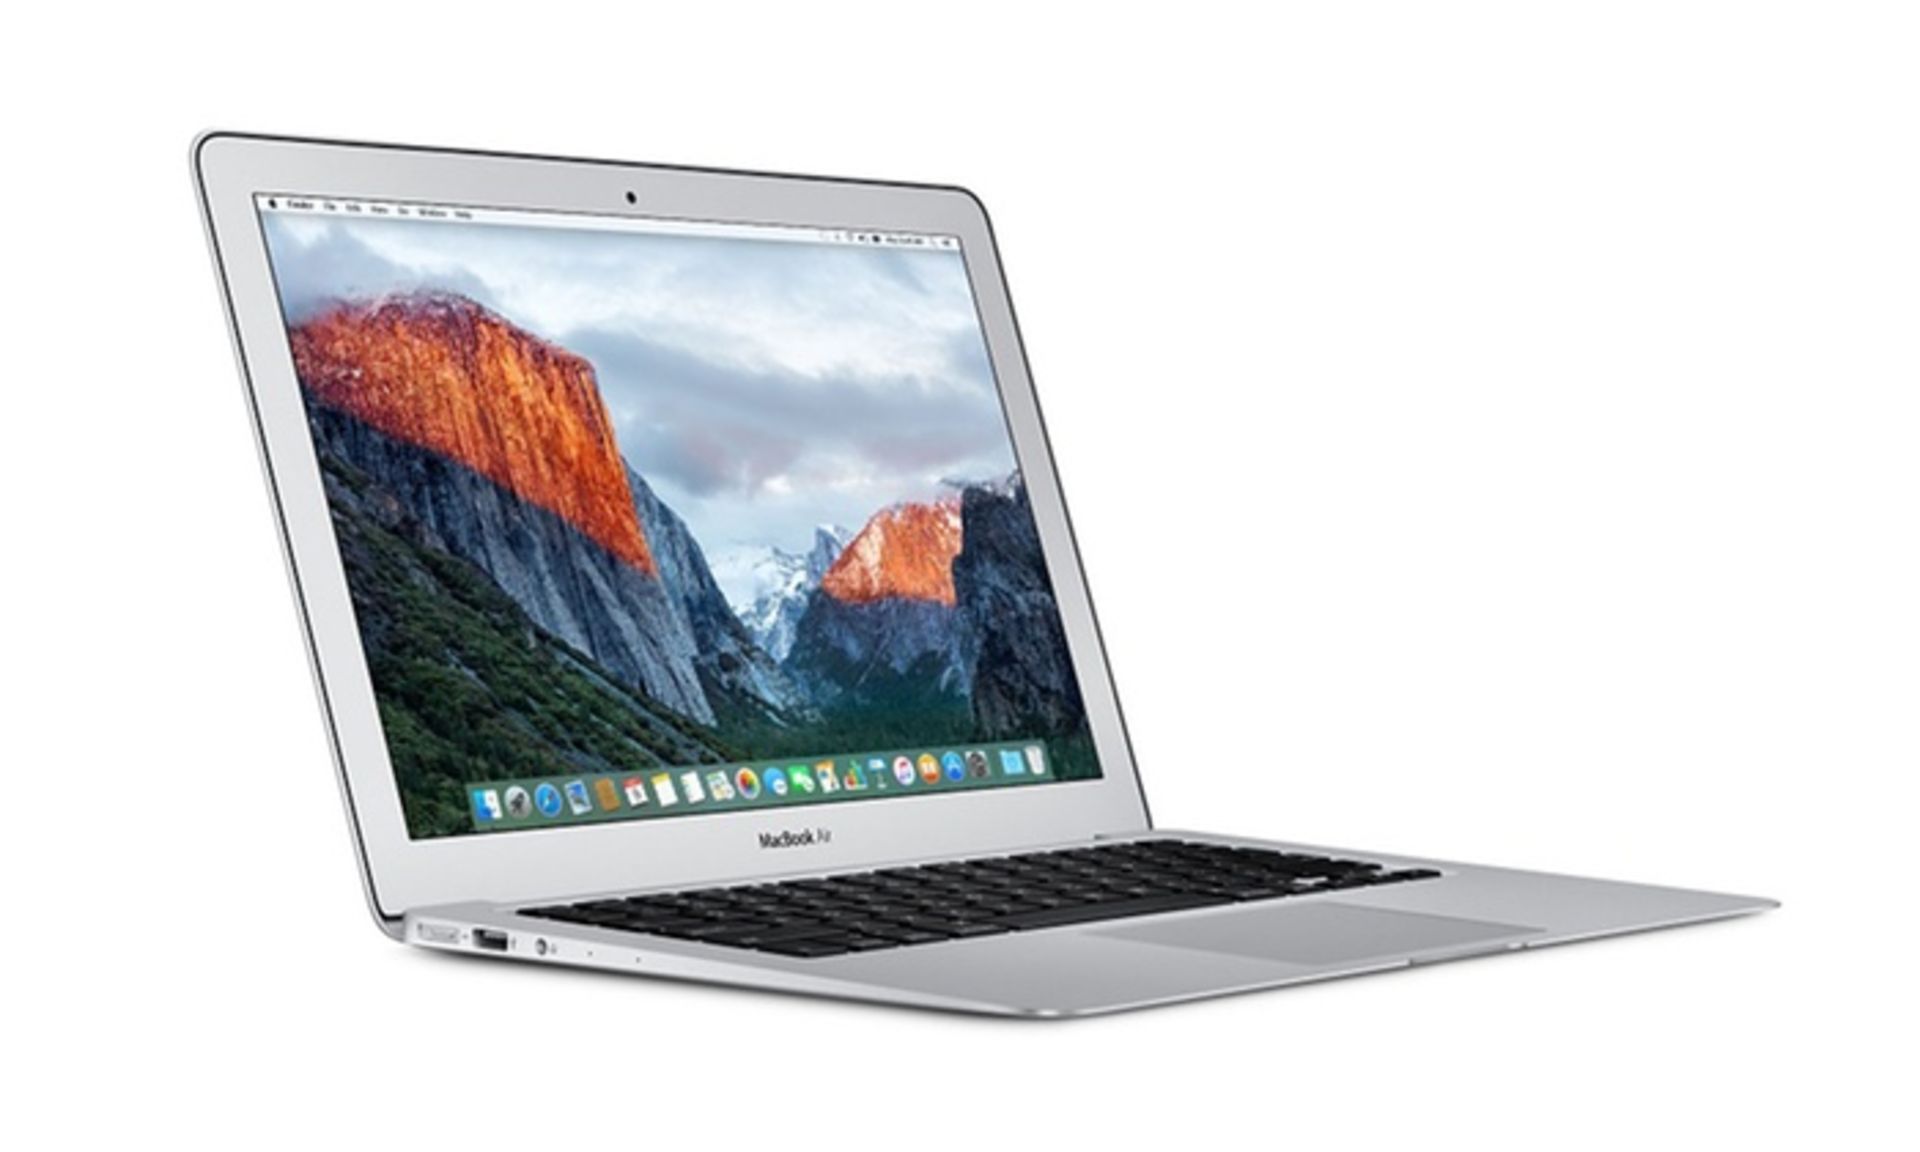 V Brand New Apple MacBook Air A1466 13.3 Inch - Core i5 - 8GB - 128GB SSD - Box Open But Item Is